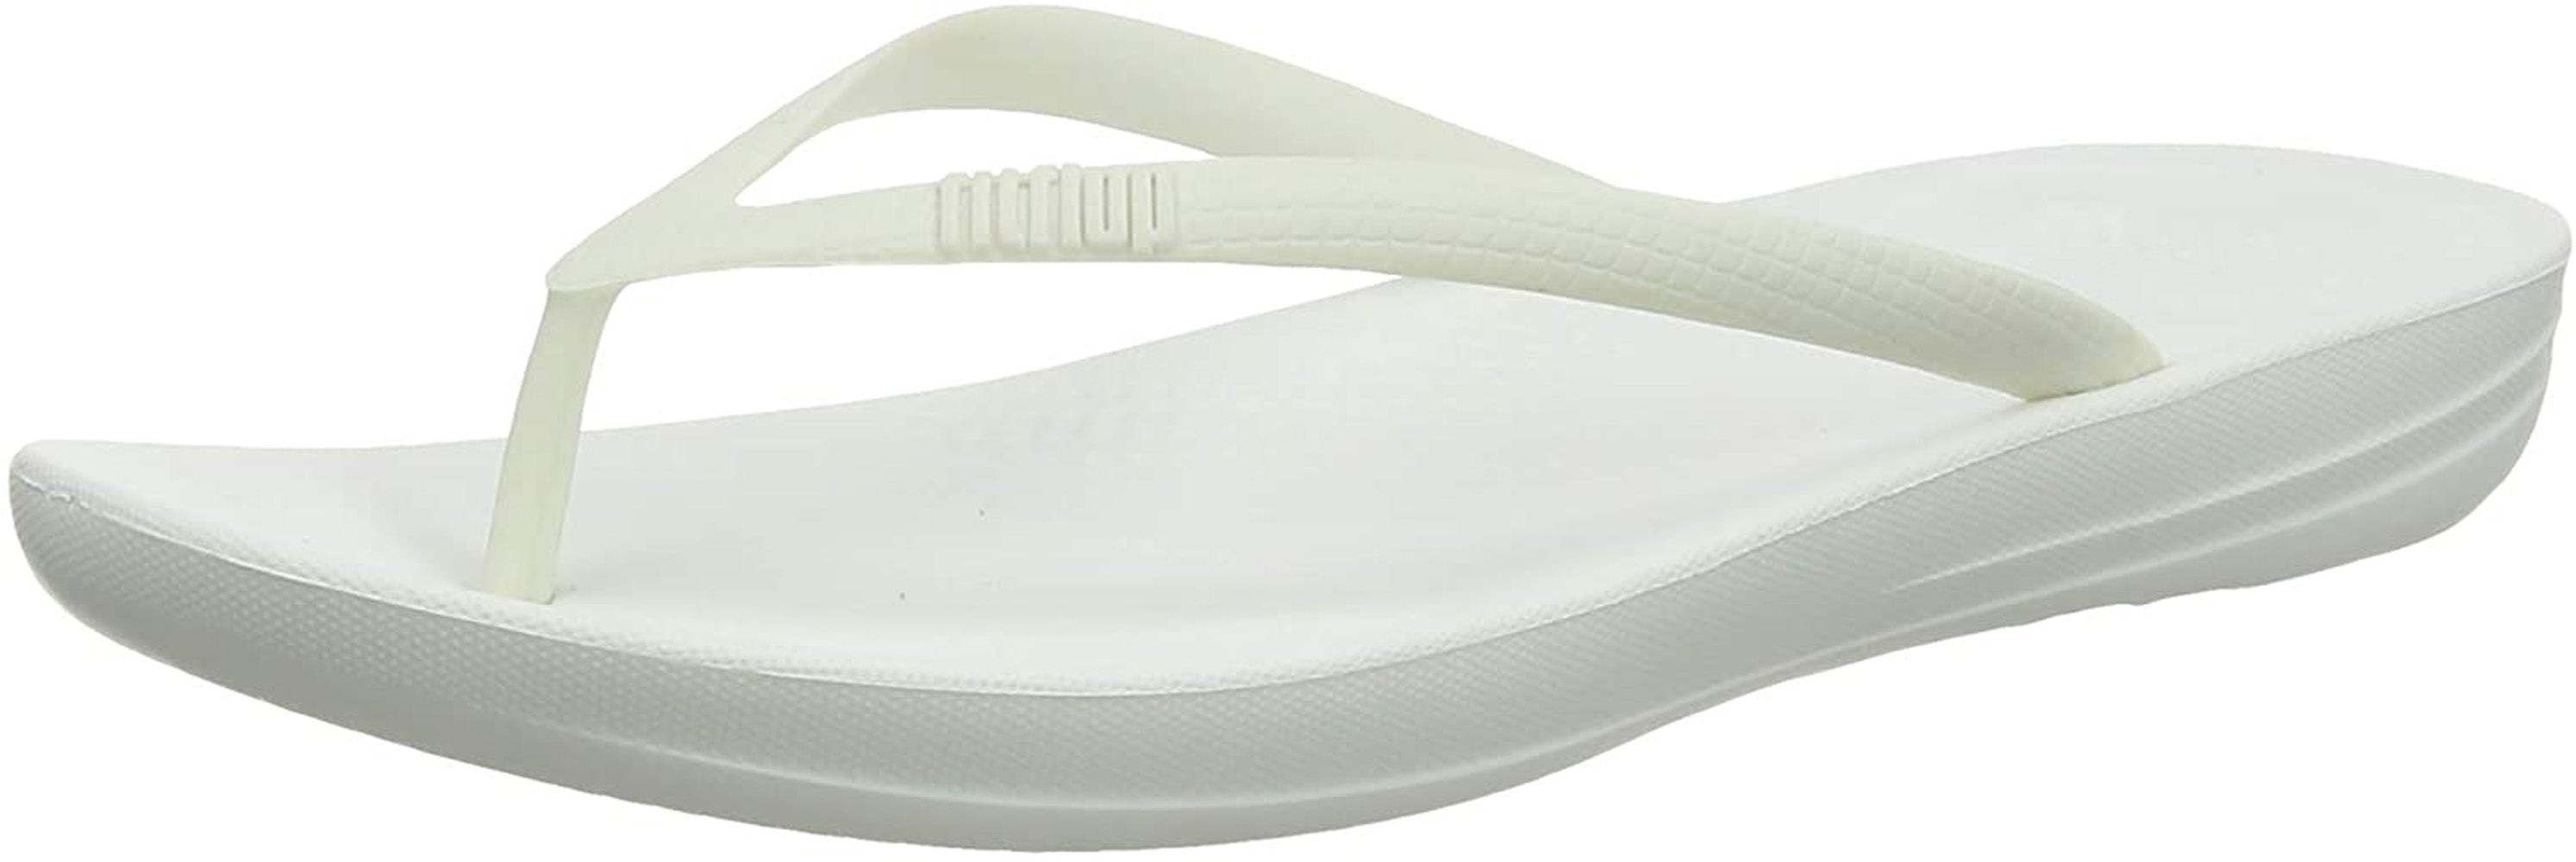 Women's FitFlop Iqushion Ergonomic Flip-Flops in Urban White Side Angle View